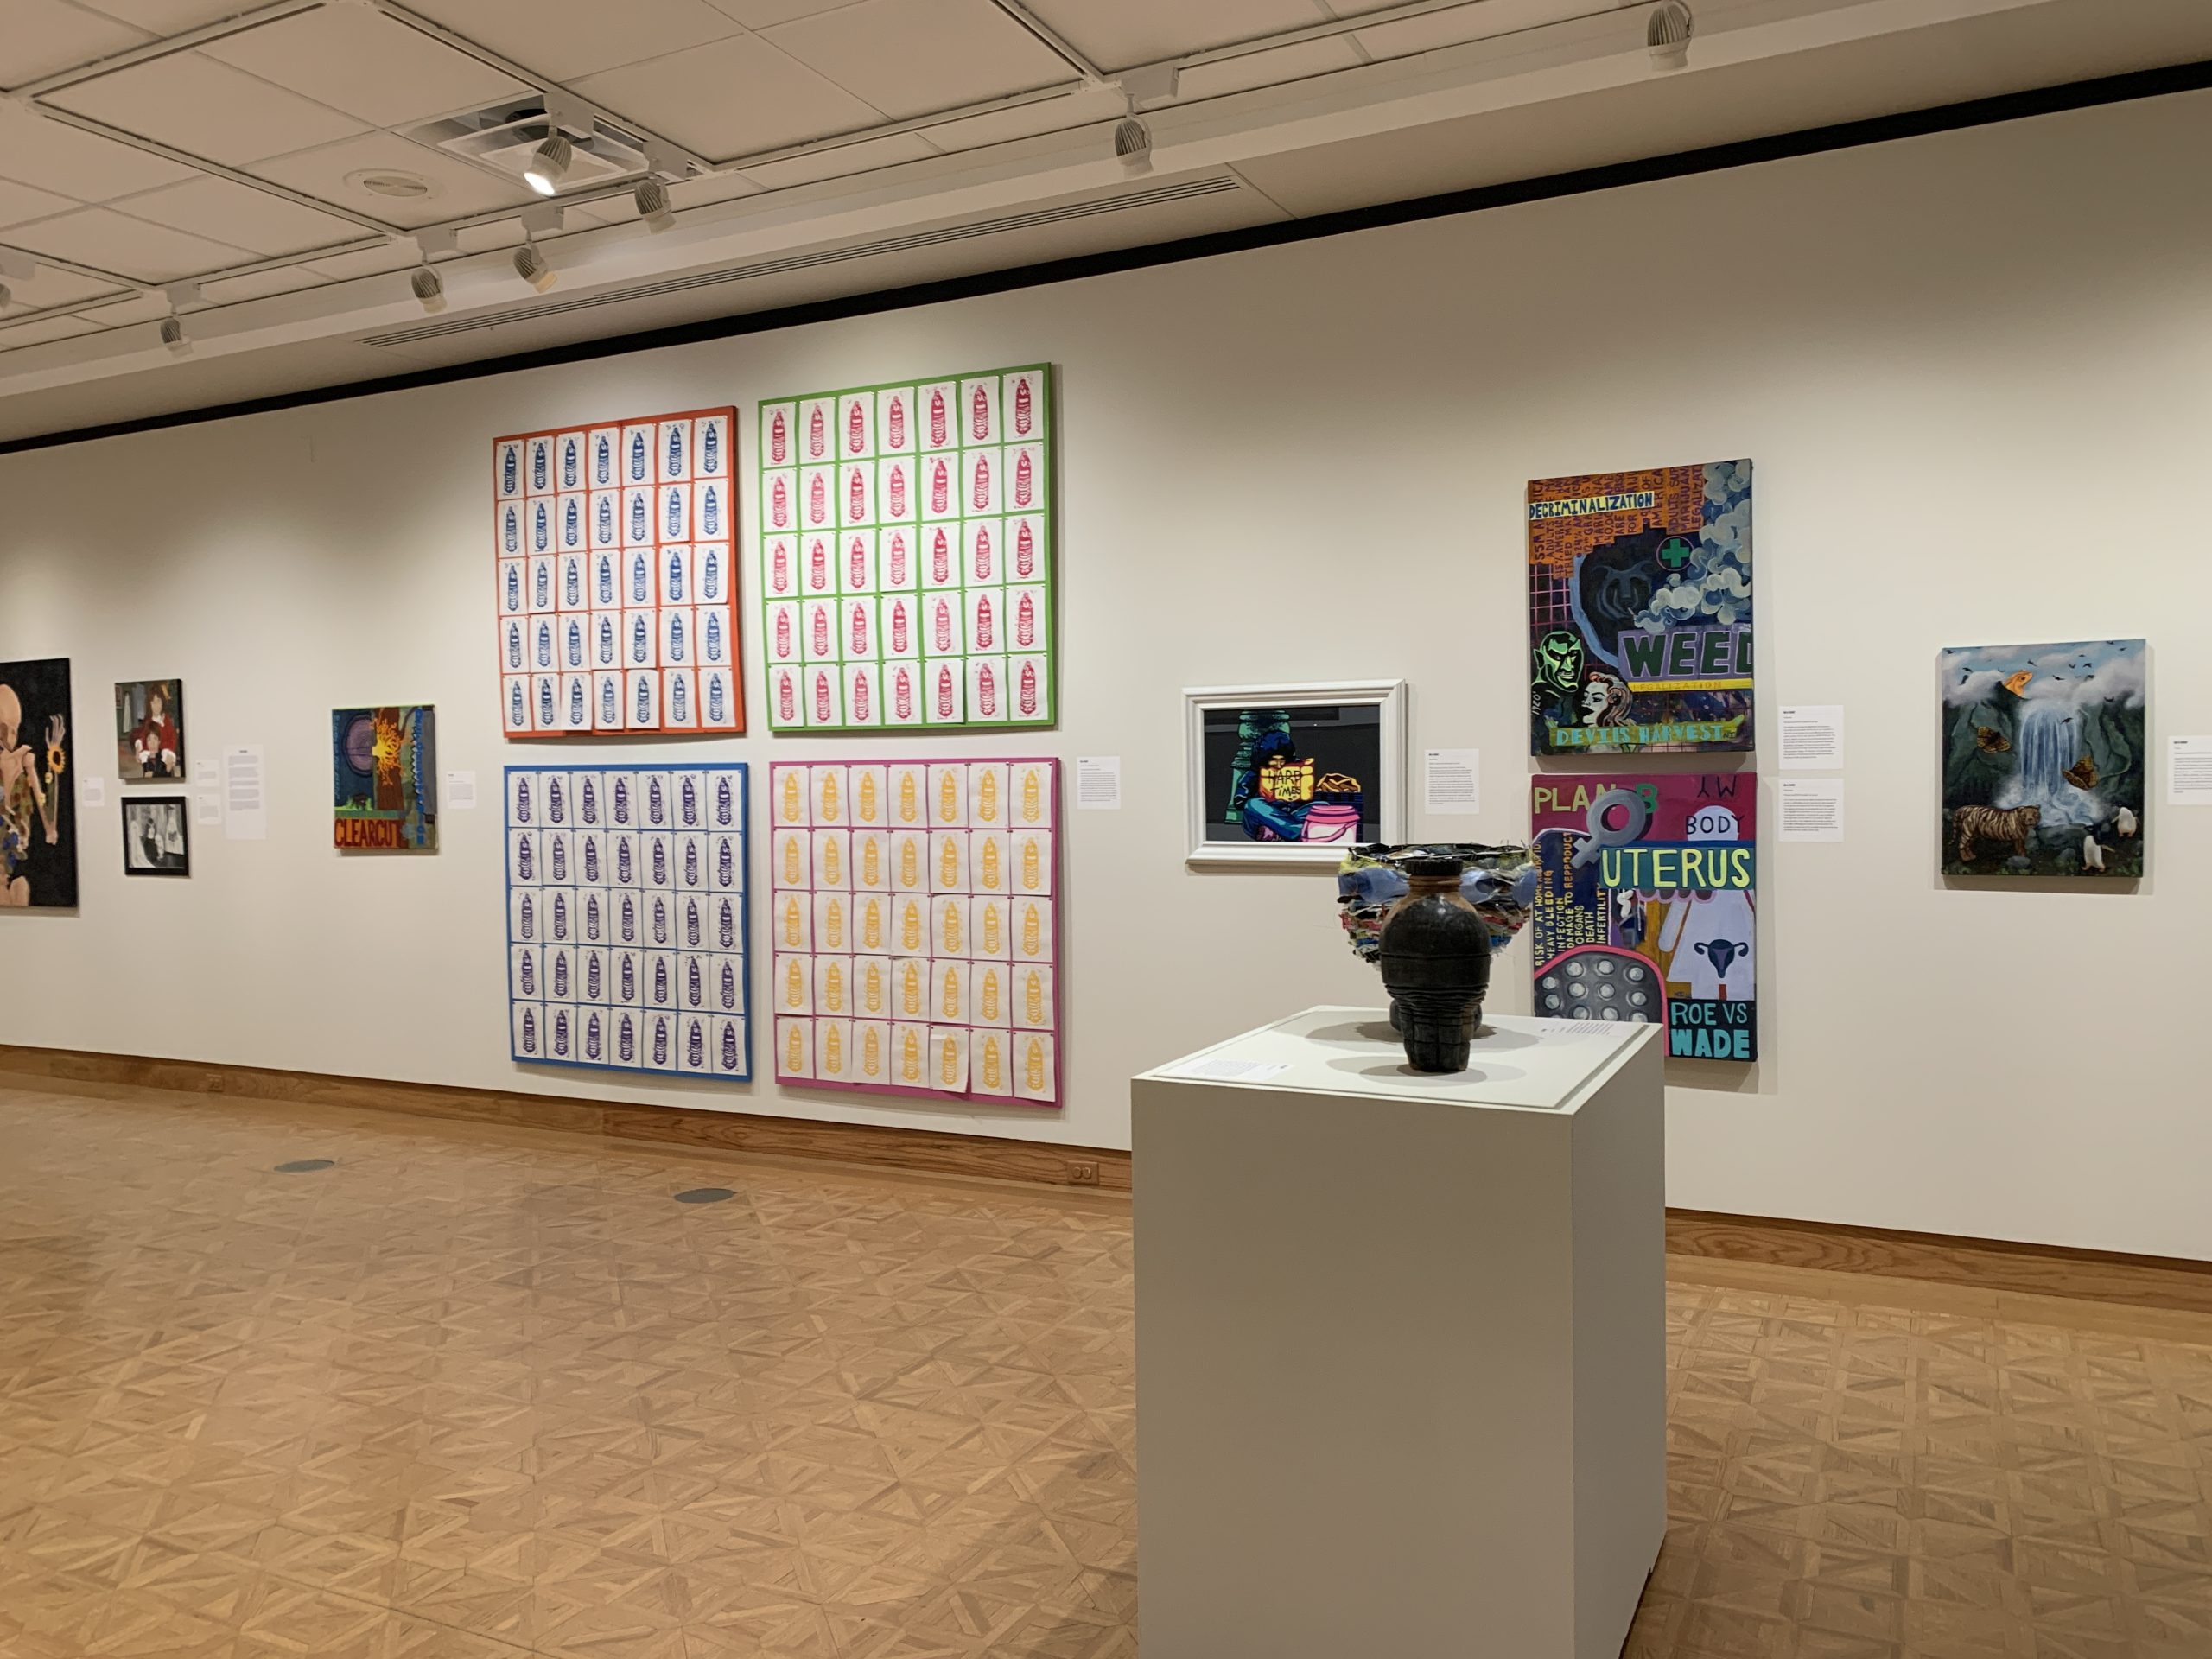 Four large, colorful panels hang on the wall in the center of the image. Each panel contains 30 prints of water bottles. The panels are flanked by paintings on either side and a pedestal holds two three-dimensional artworks in the foreground of the image.